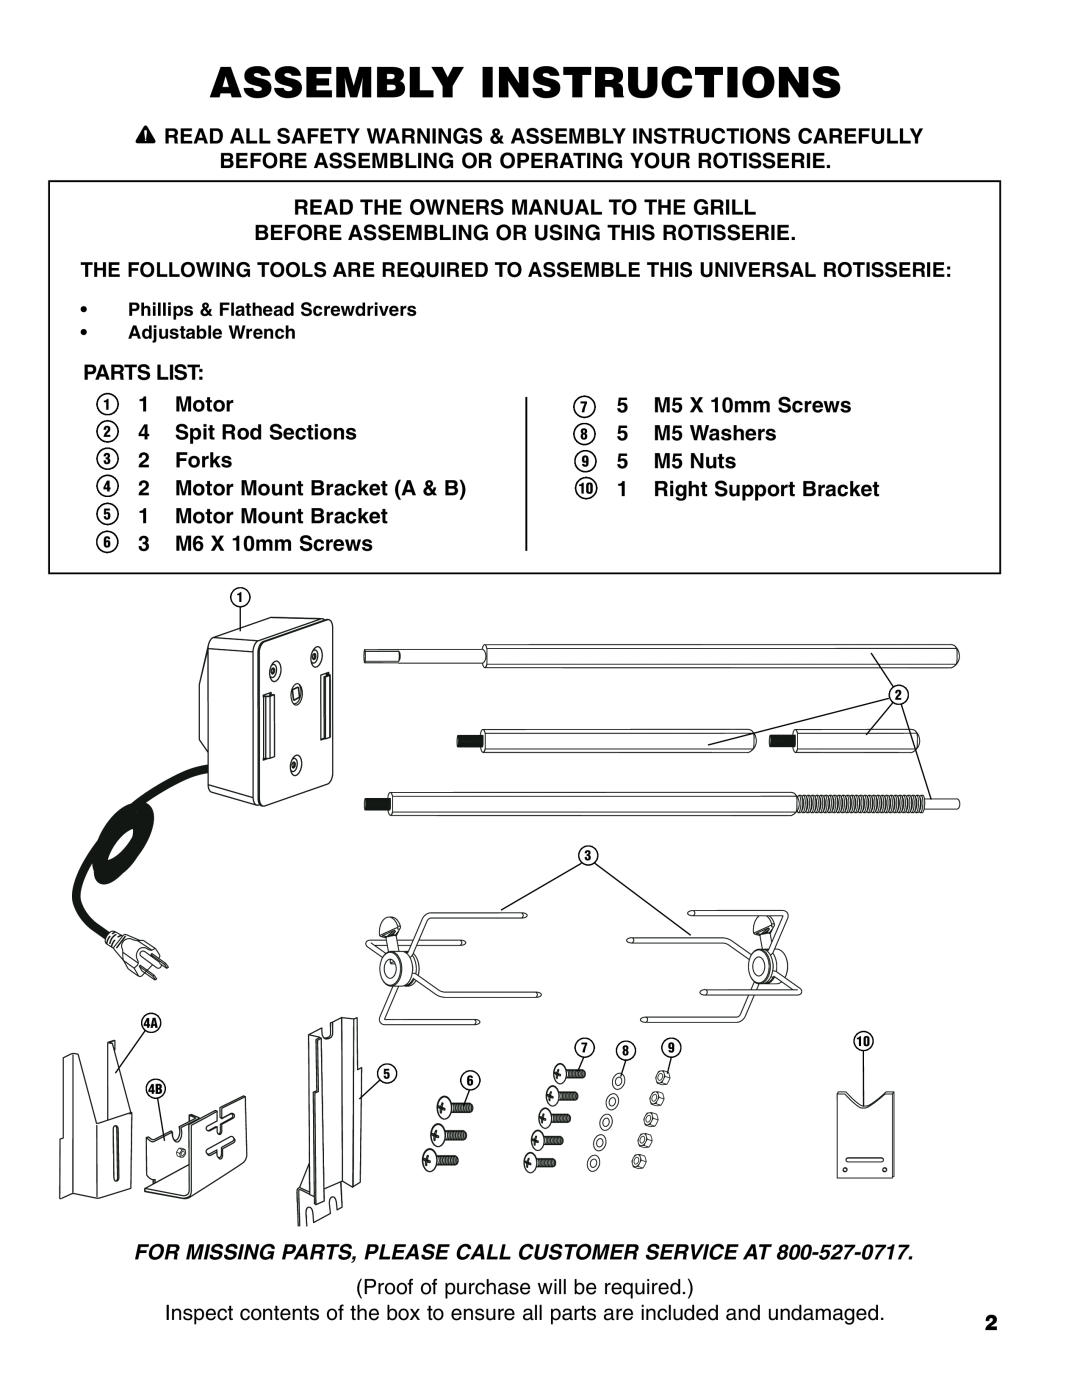 Brinkmann Universal Rotisserie manual Assembly Instructions, Proof of purchase will be required 